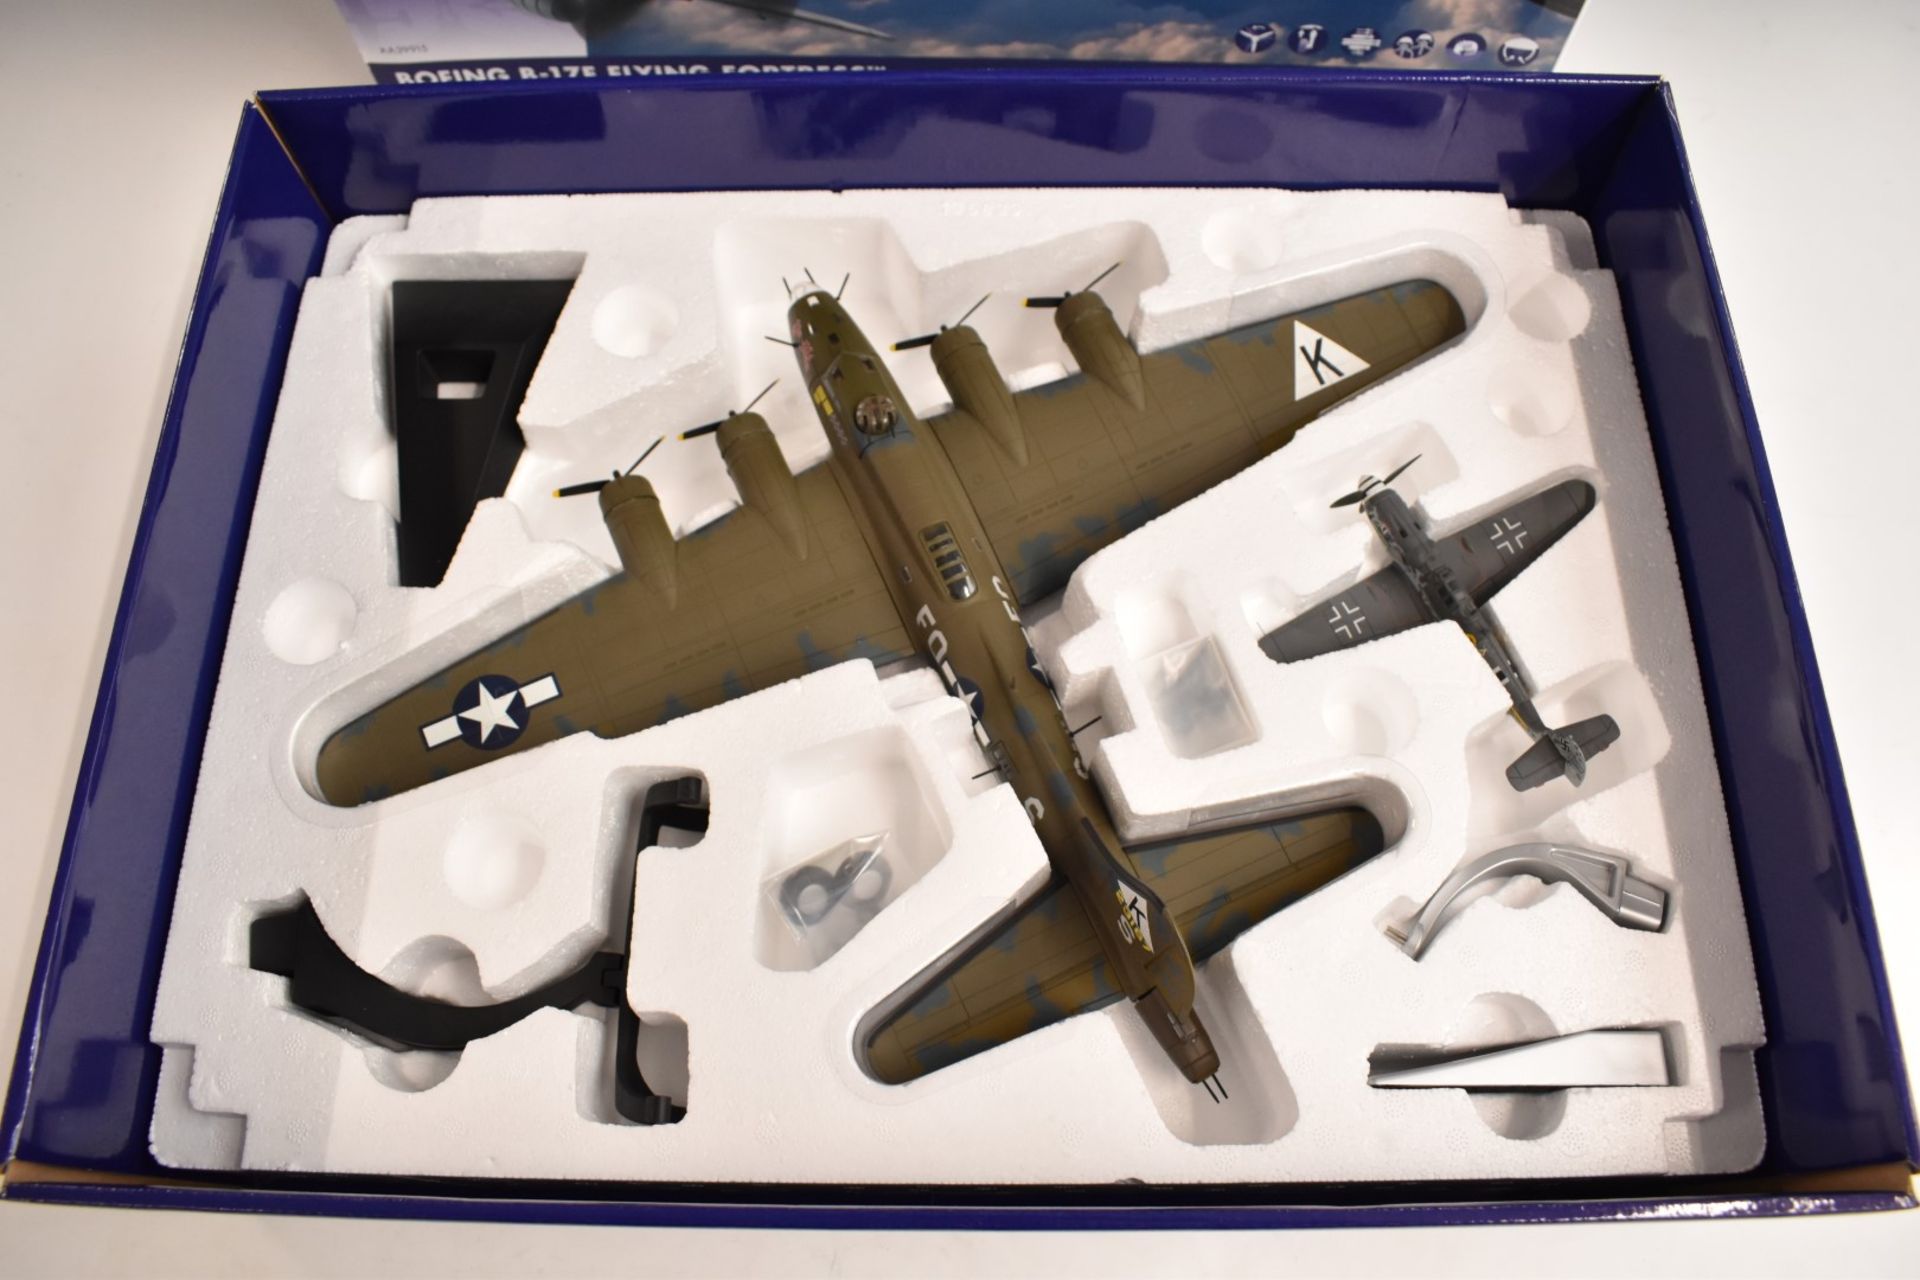 Corgi The Aviation Archive 1:72 scale limited edition diecast model Boeing B-17F Flying Fortress, - Image 2 of 2